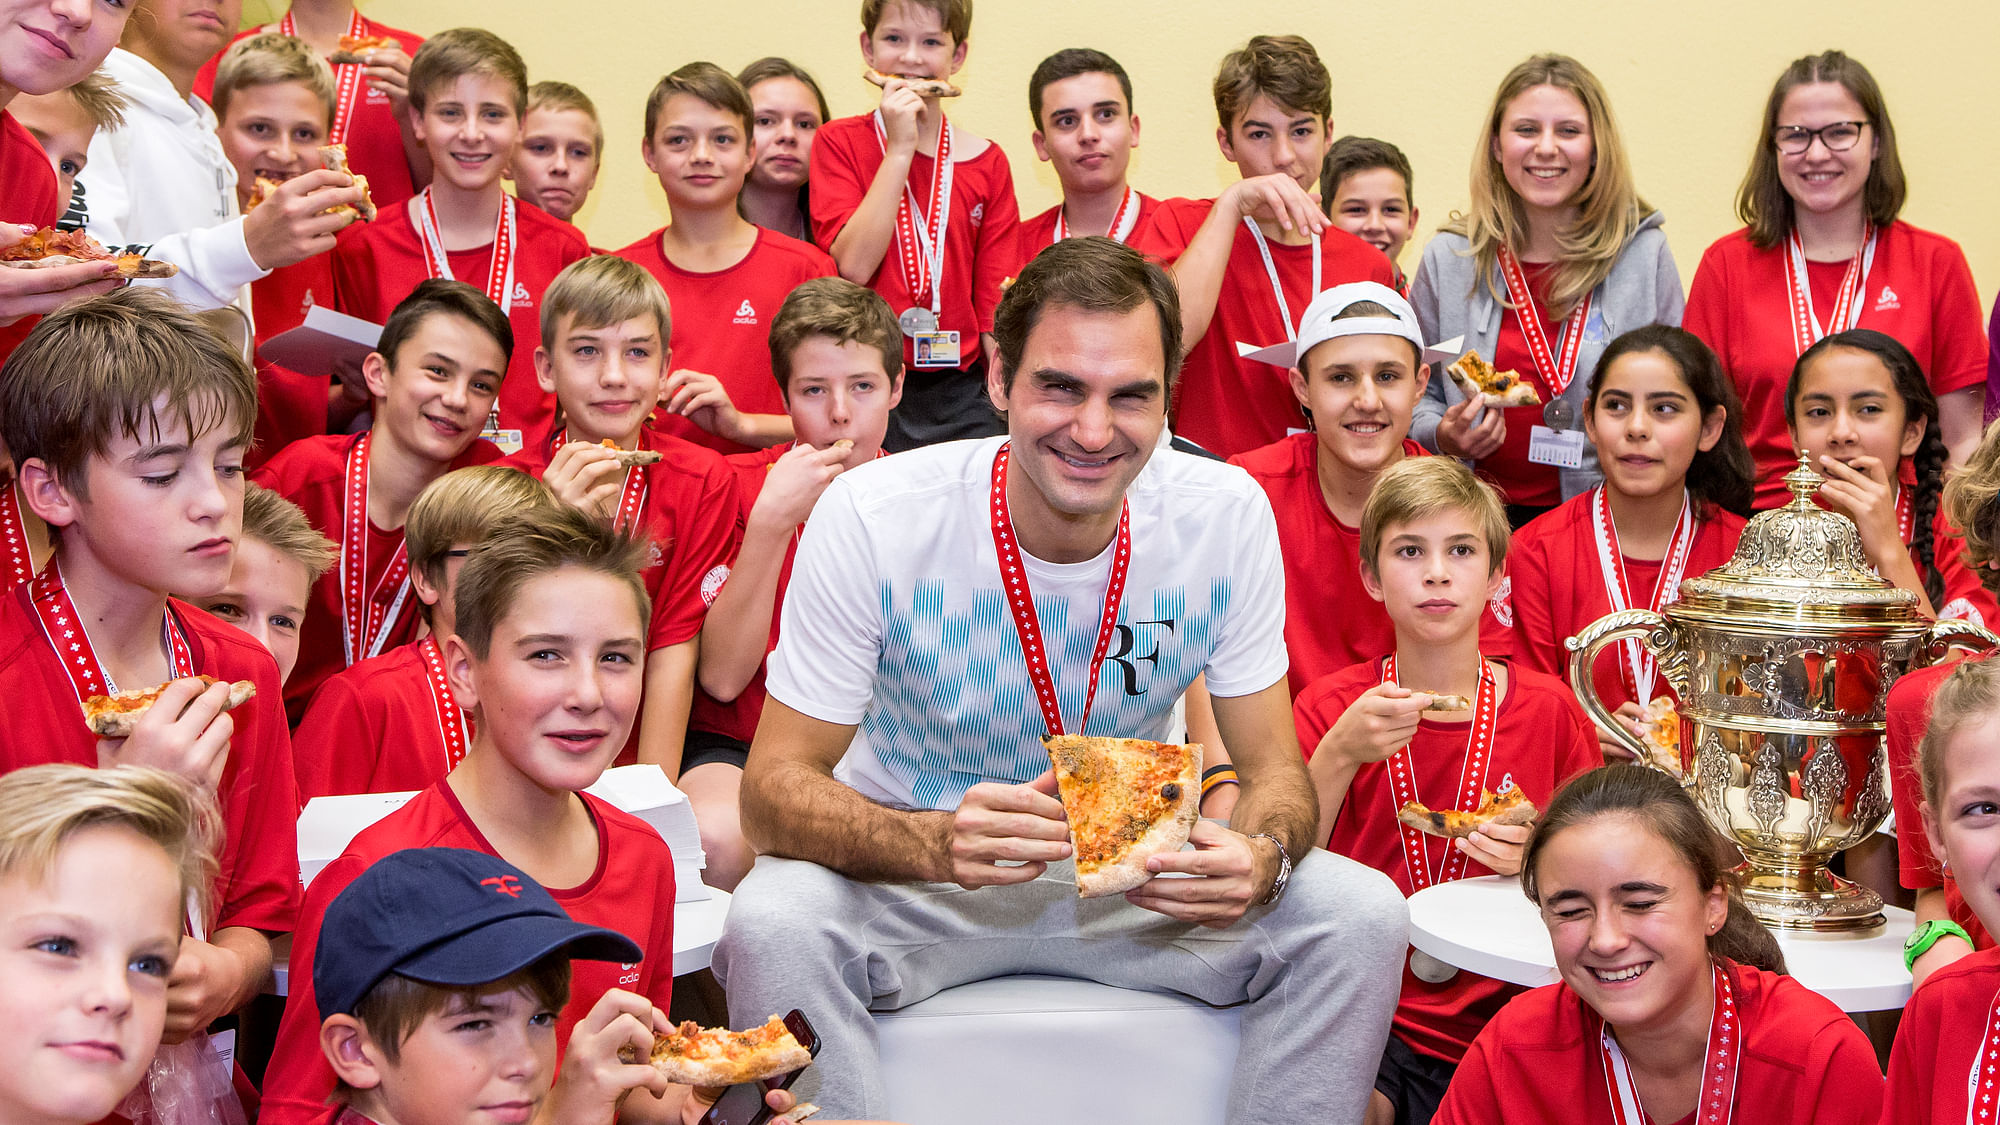 Switzerland’s Roger Federer eats pizza with ball kids after winning the final match against Argentina’s Juan Martin Del Potro at the Swiss Indoors tennis tournament at the St. Jakobshalle in Basel, Switzerland, on Sunday, October 29, 2017.&nbsp;